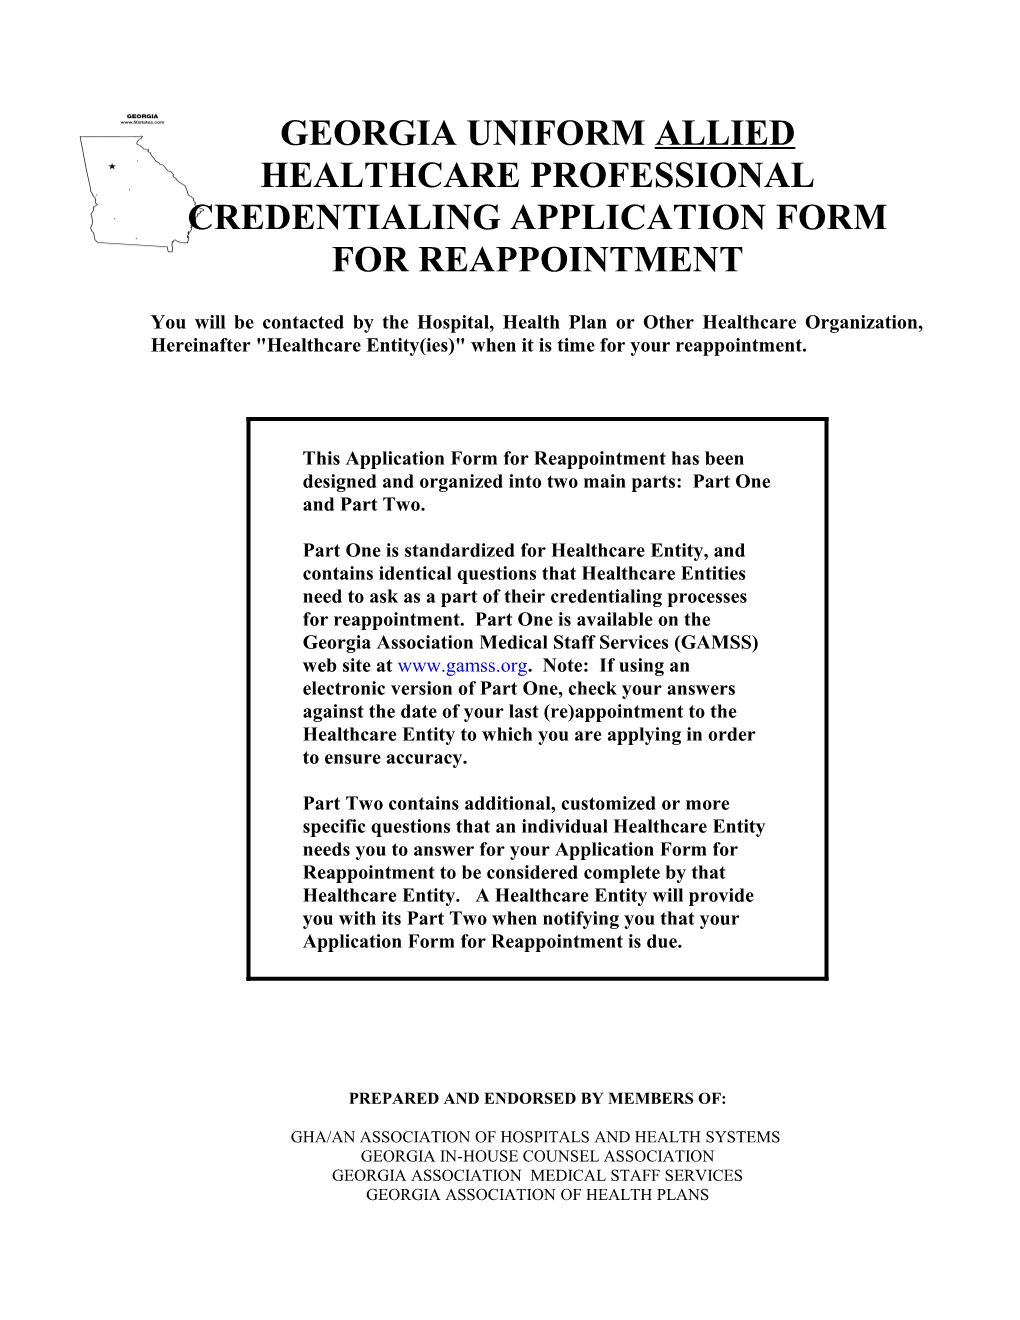 Georgia Uniform Allied Healthcare Professional Credentialing Application Form for Reappointment